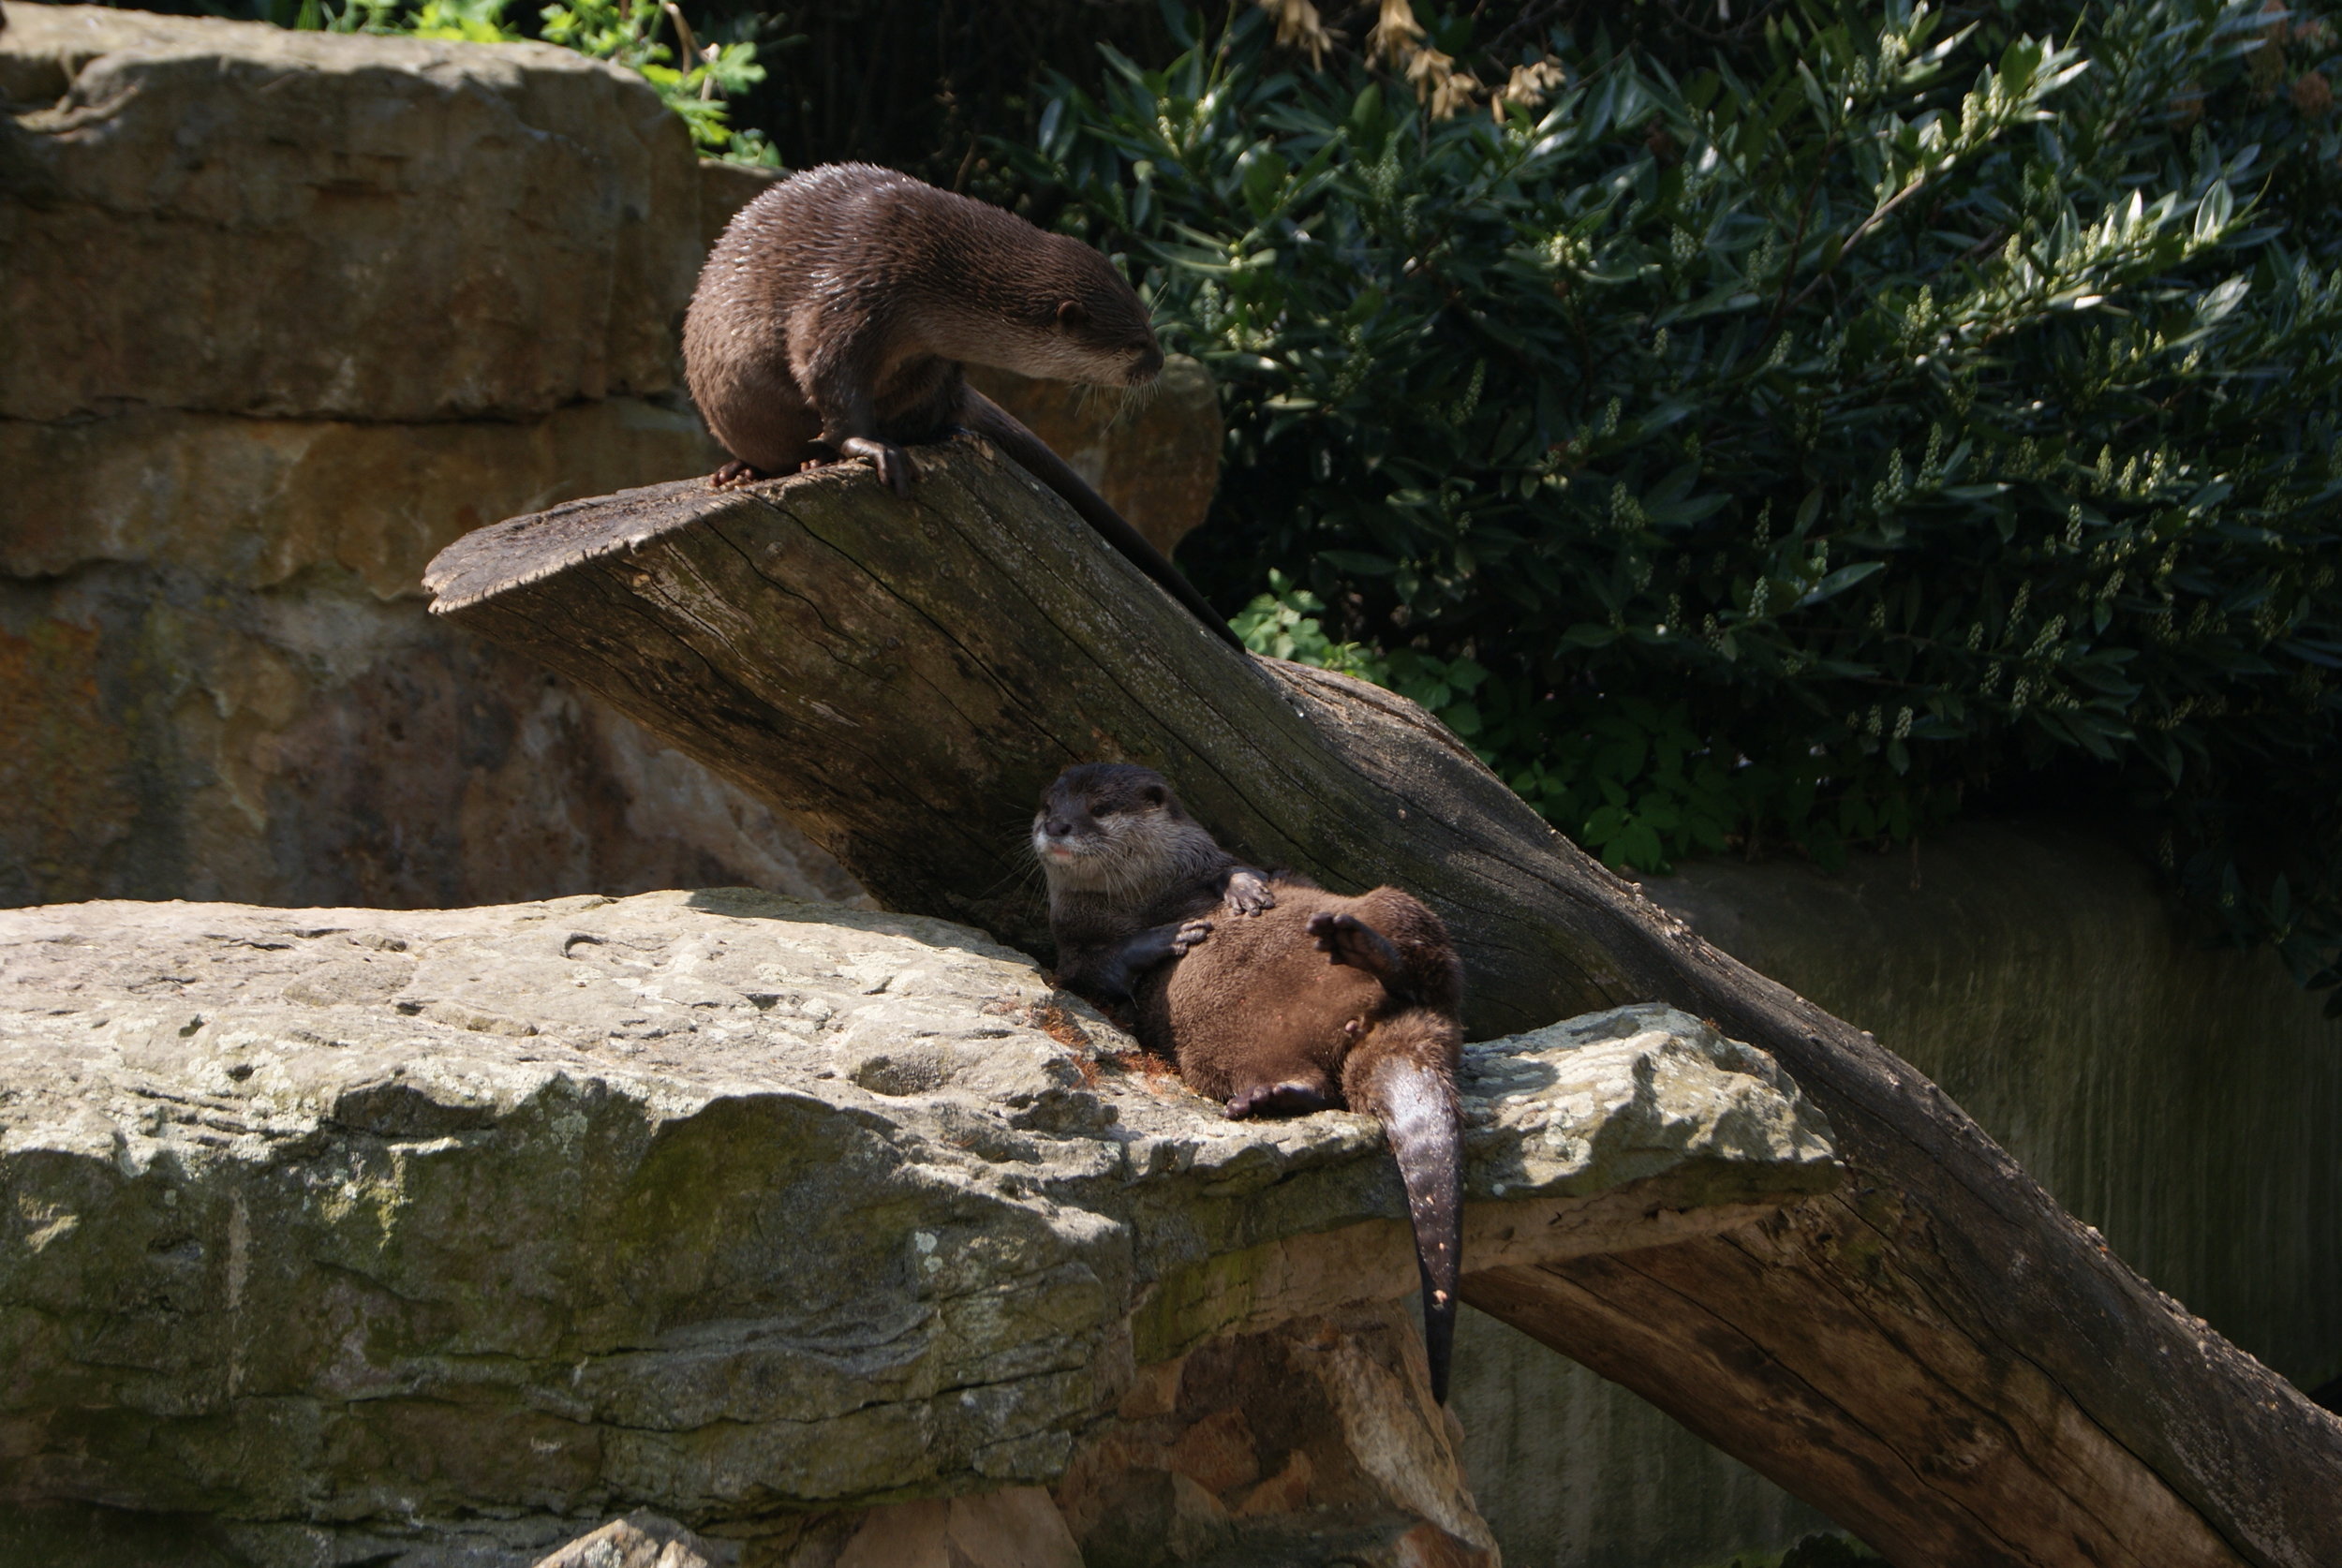 Just Another Day in the Life of Otters: A Bit of Lounging, a Bit of Climbing